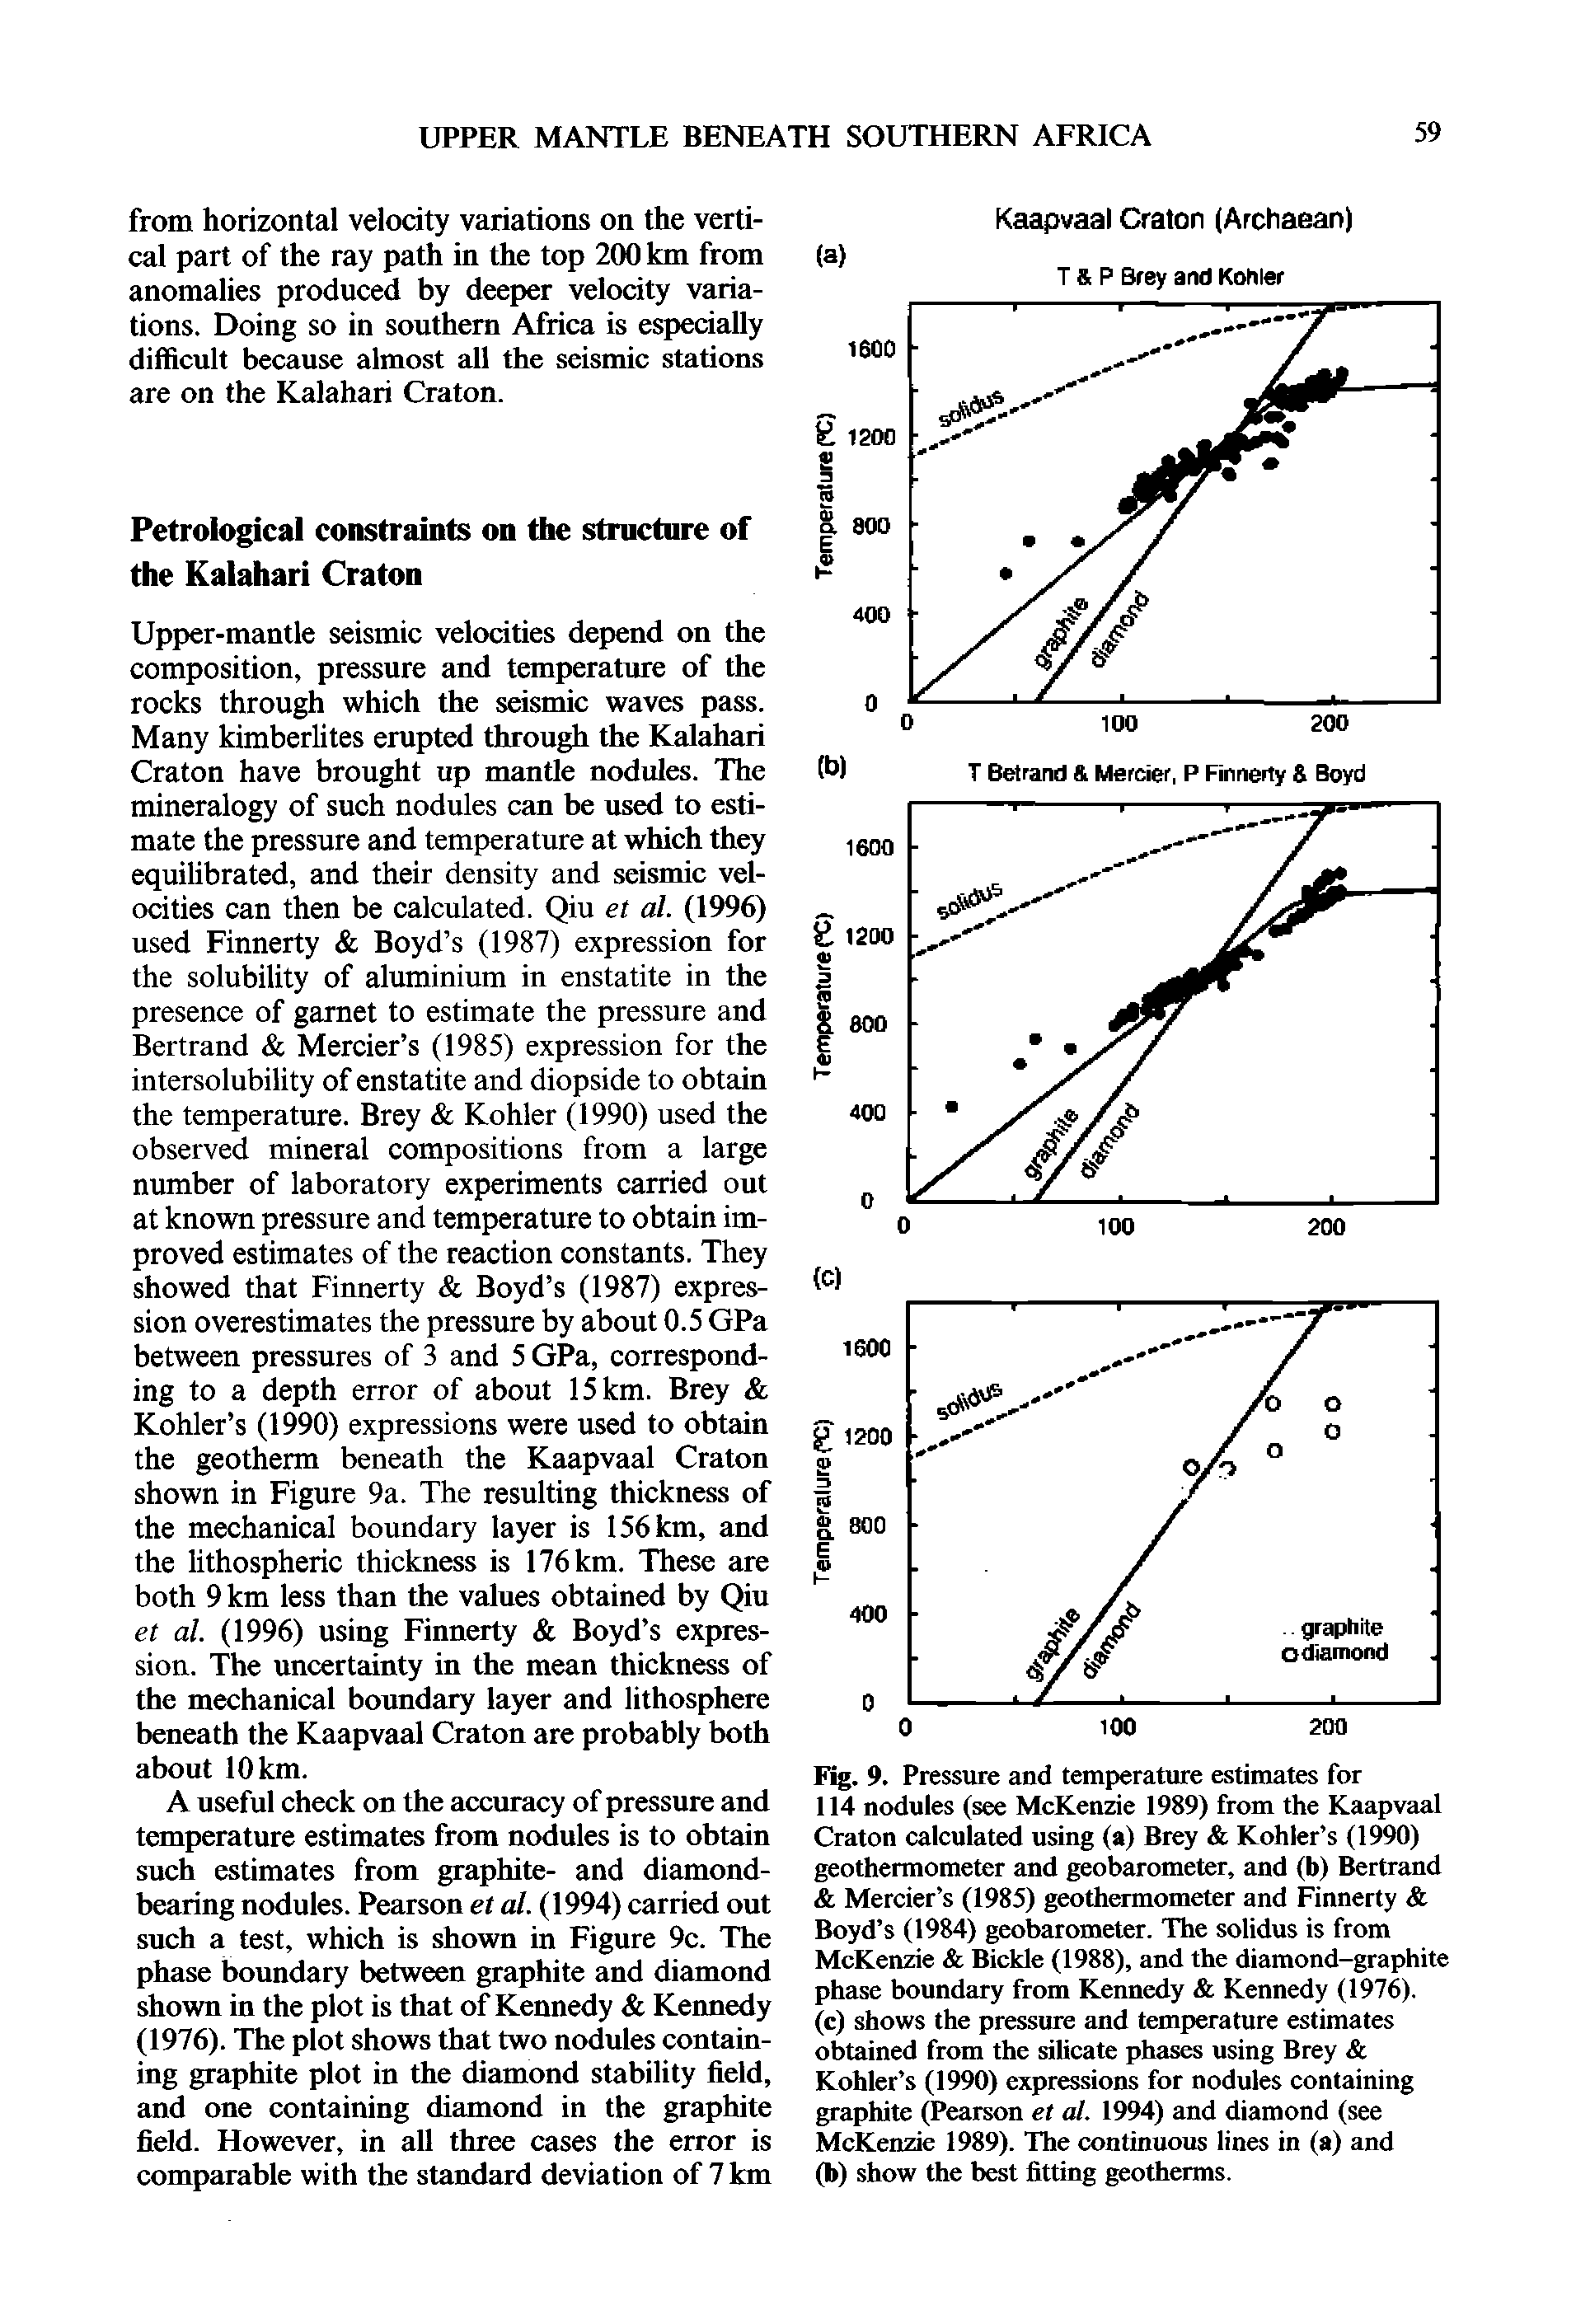 Fig. 9. Pressure and temperature estimates for 114 nodules (see McKenzie 1989) from the Kaapvaal Craton calculated using (a) Brey Kohler s (1990) geothermometer and geobarometer, and (b) Bertrand Mercier s (1985) geothermometer and Finnerty Boyd s (1984) geobarometer. The solidus is from McKenzie Bickle (1988), and the diamond-graphite phase boundary from Kennedy Kennedy (1976).